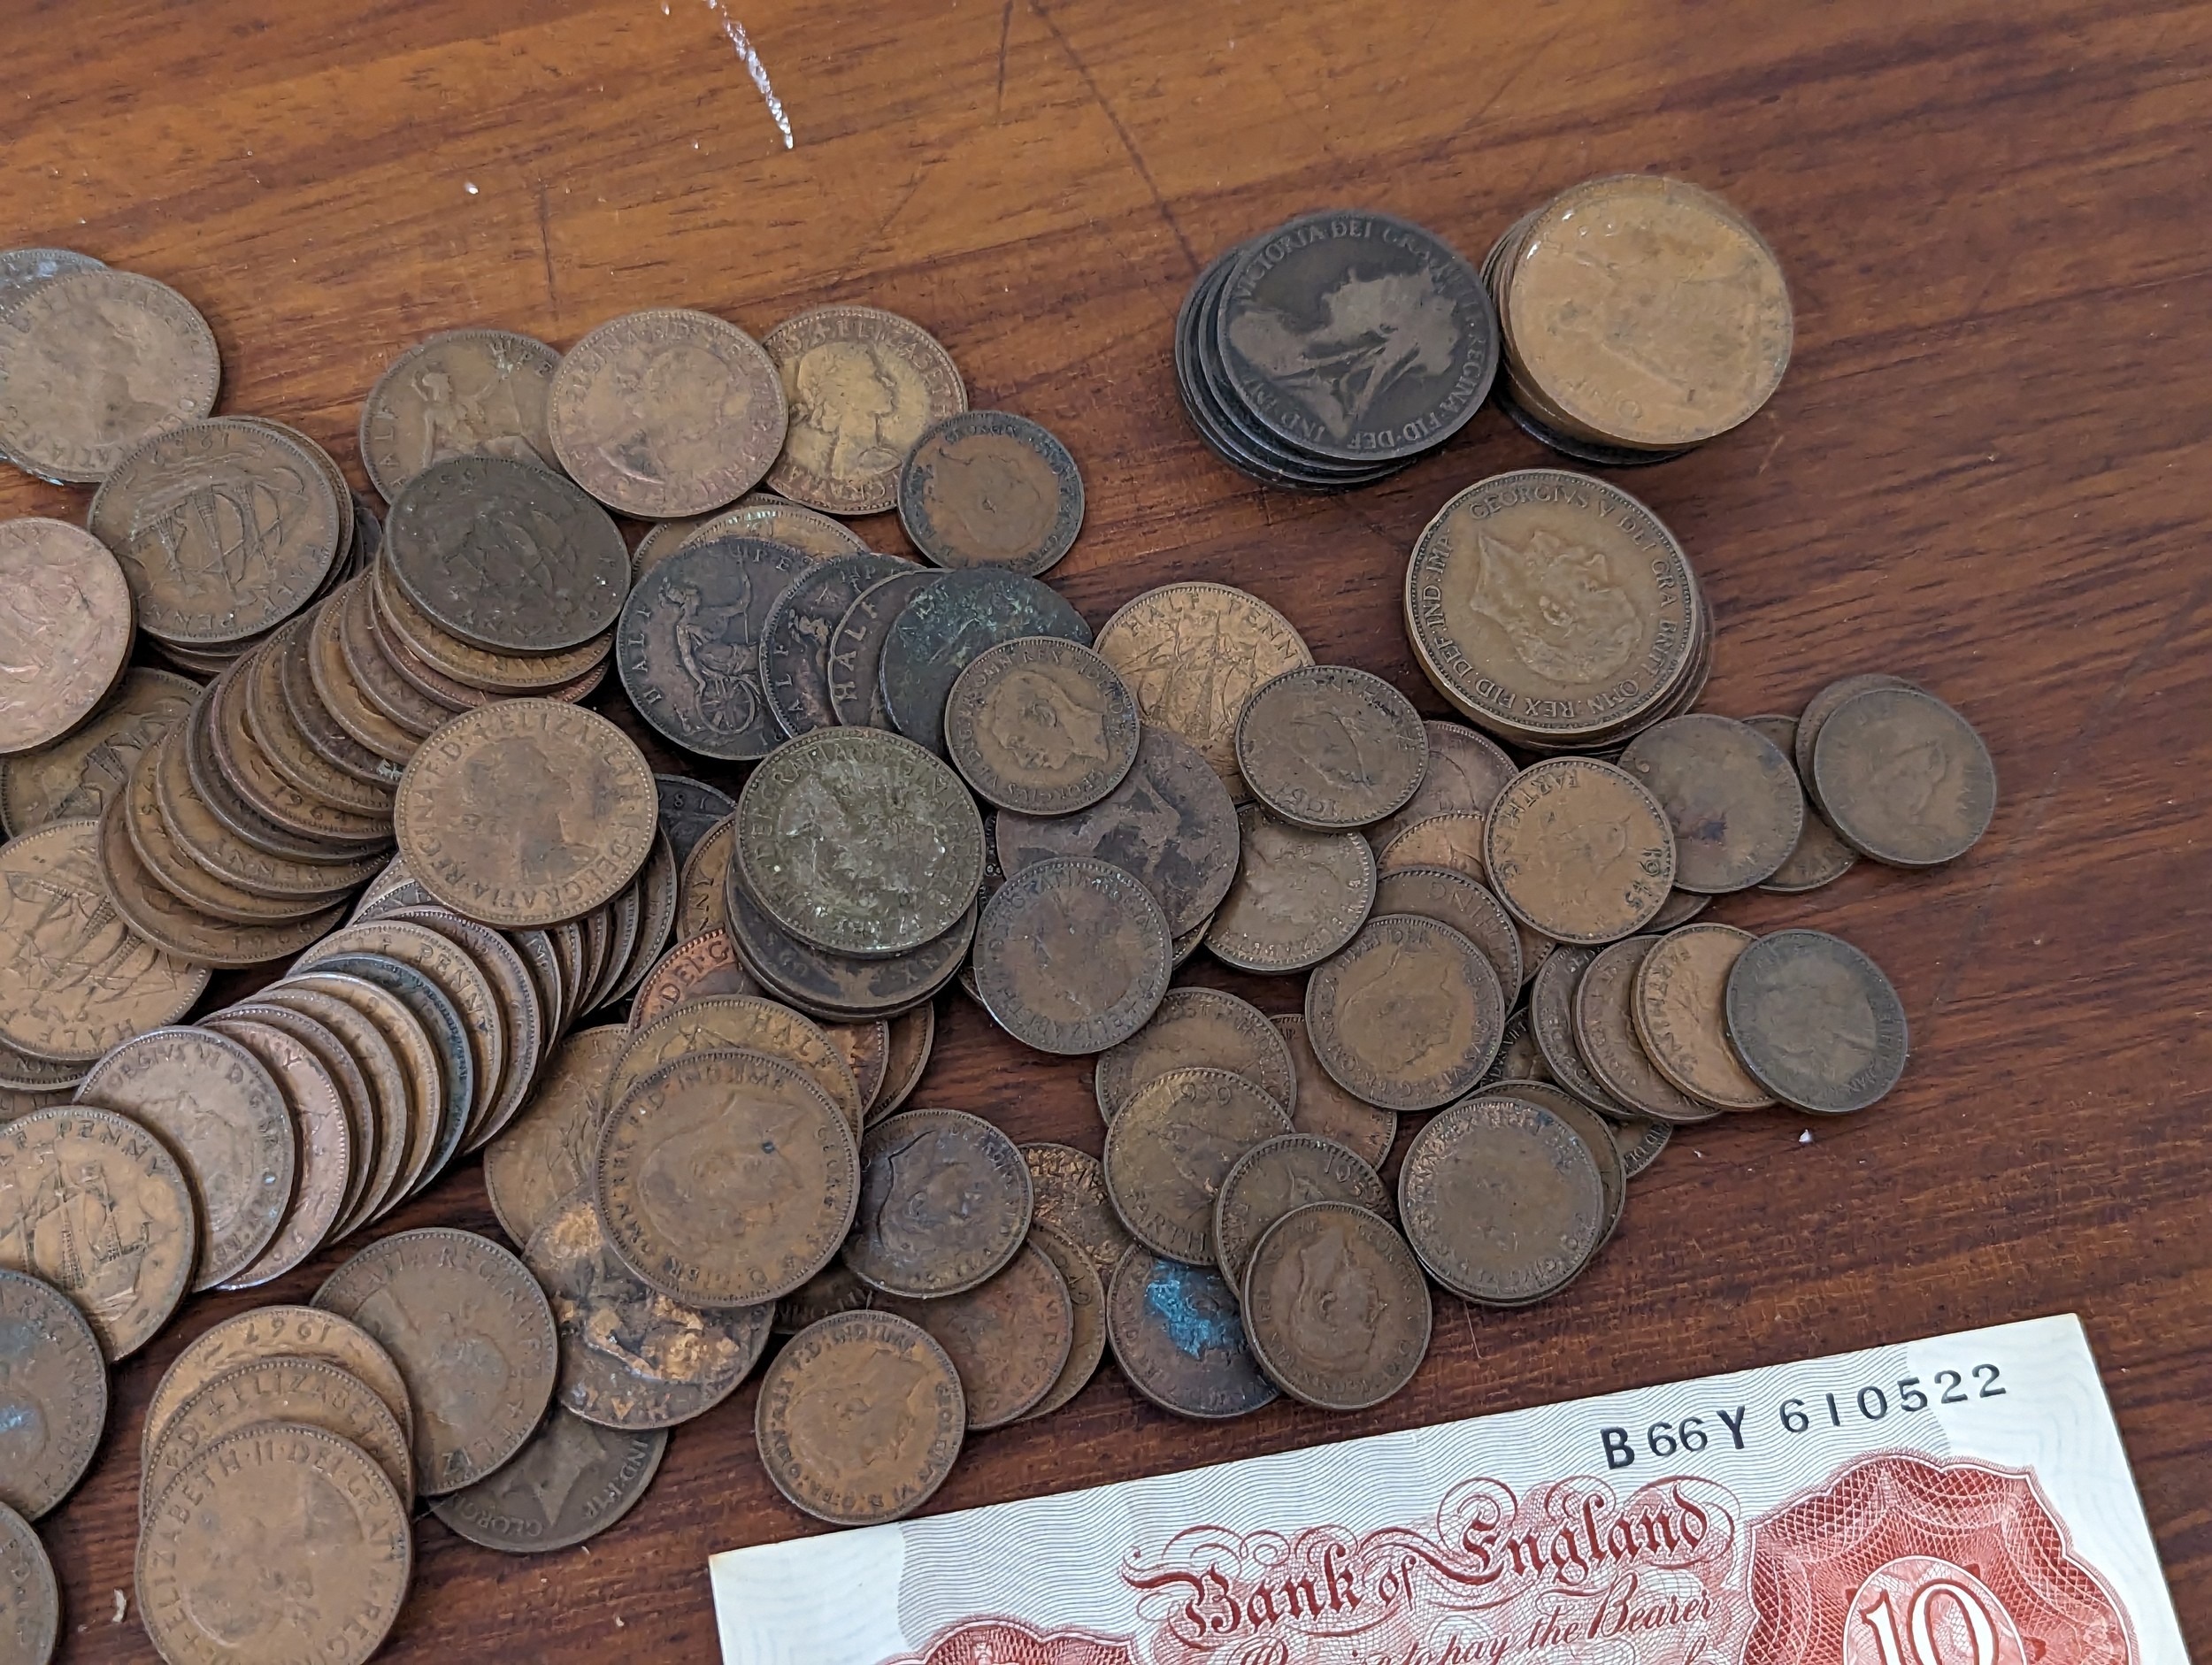 Mixed British Coins - A collection of Victorian and later pennies, halfpennies, later Florins, - Image 4 of 7